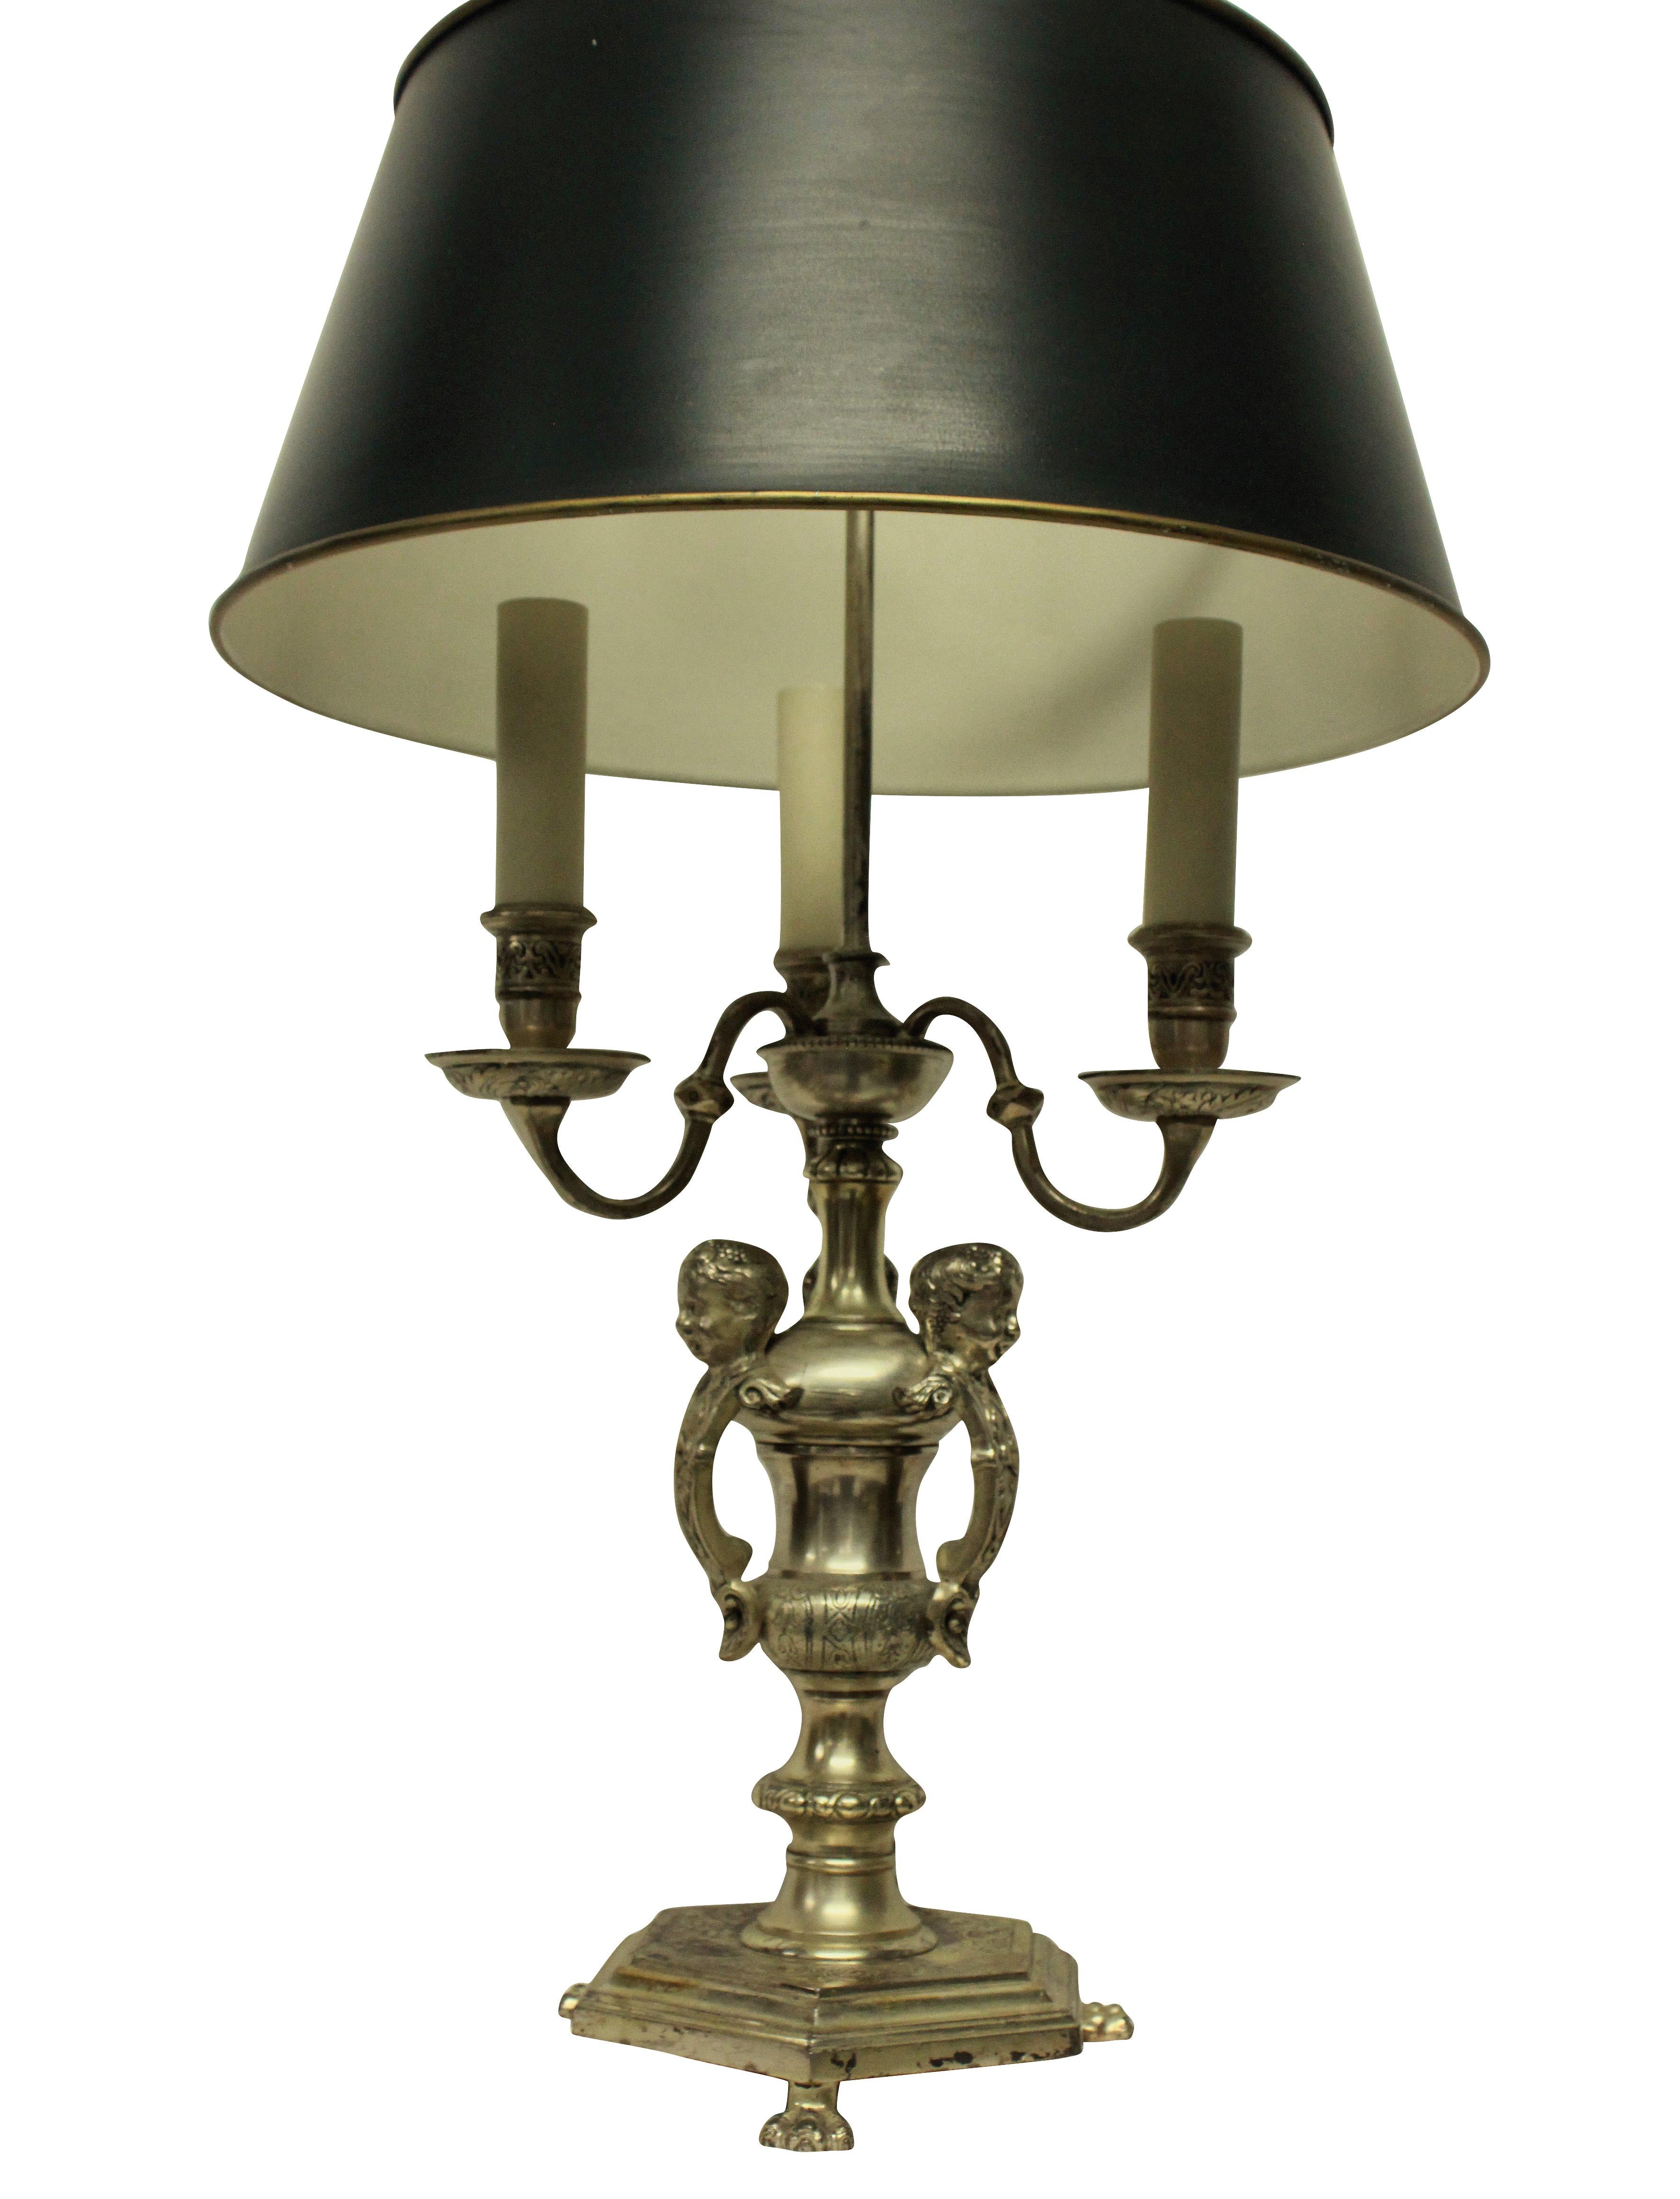 An English silver plated bronze Bouillotte lamp of good quality after Knole.

With three lights and an adjustable shade in dark green.